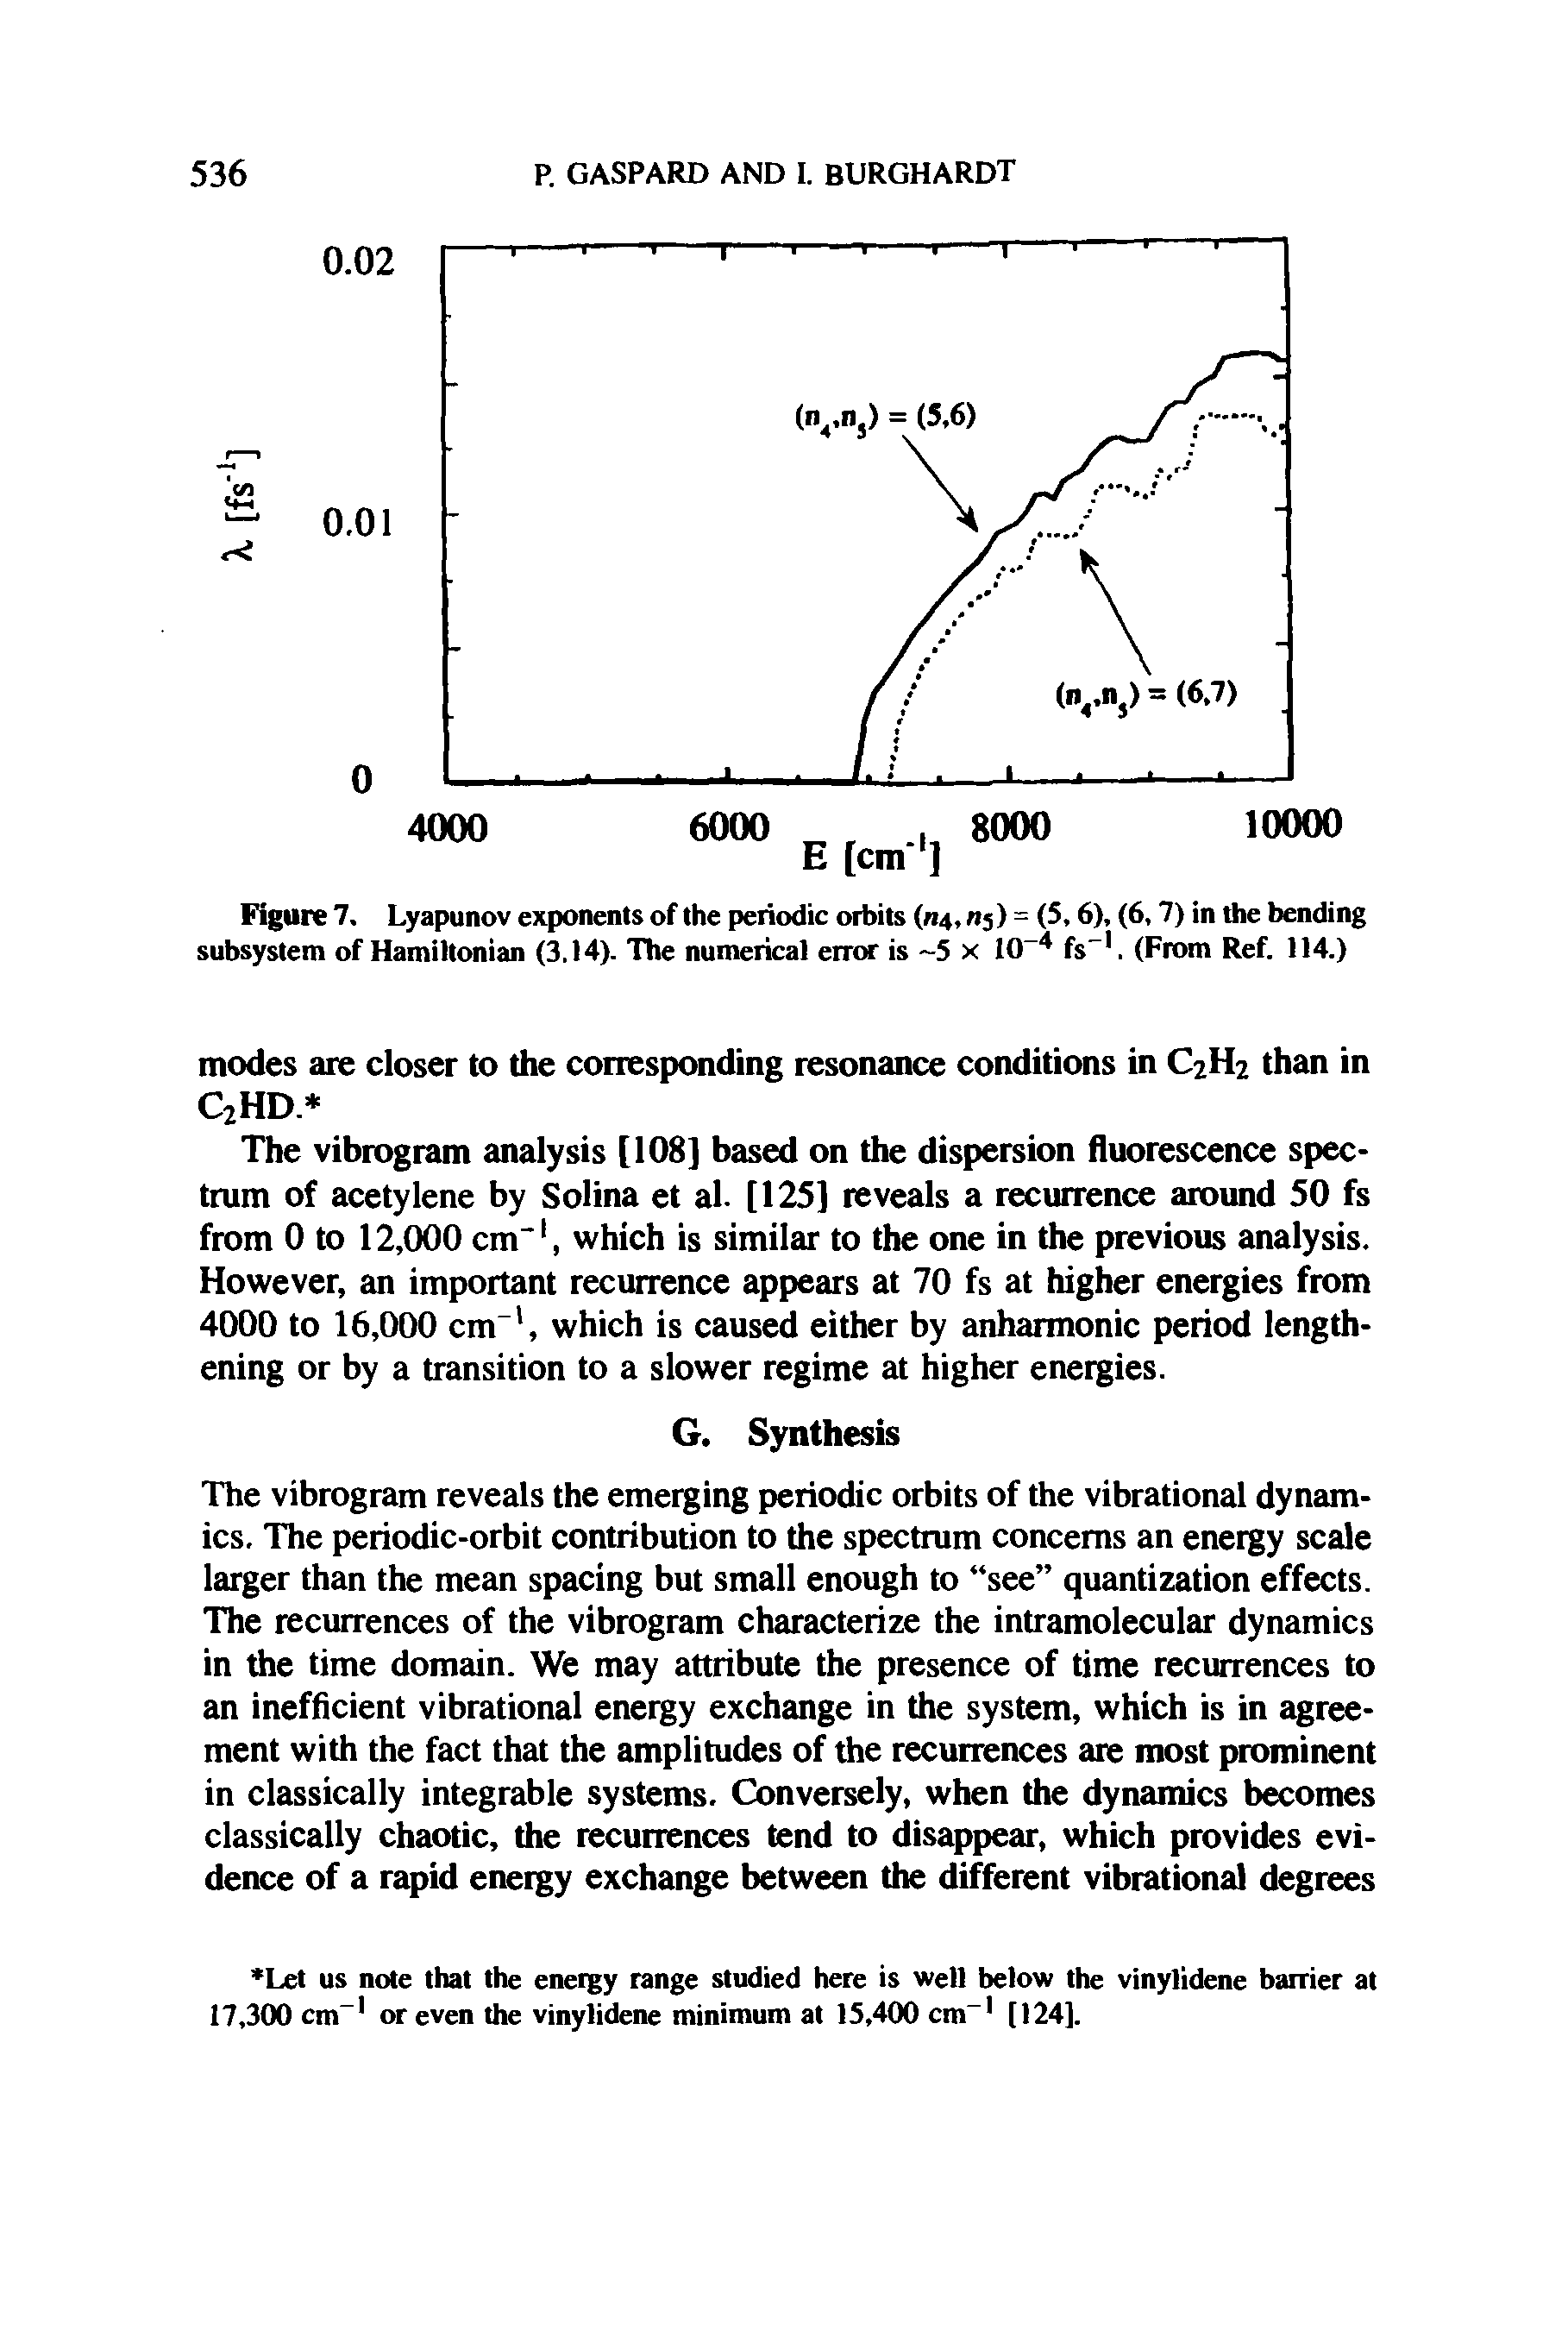 Figure 7. Lyapunov exponents of the periodic orbits (n4, n ) = (5,6), (6,7) in the bending subsystem of Hamiltonian (3.14). The numerical error is -5 x 10-4 fs-1. (From Ref. 114.)...